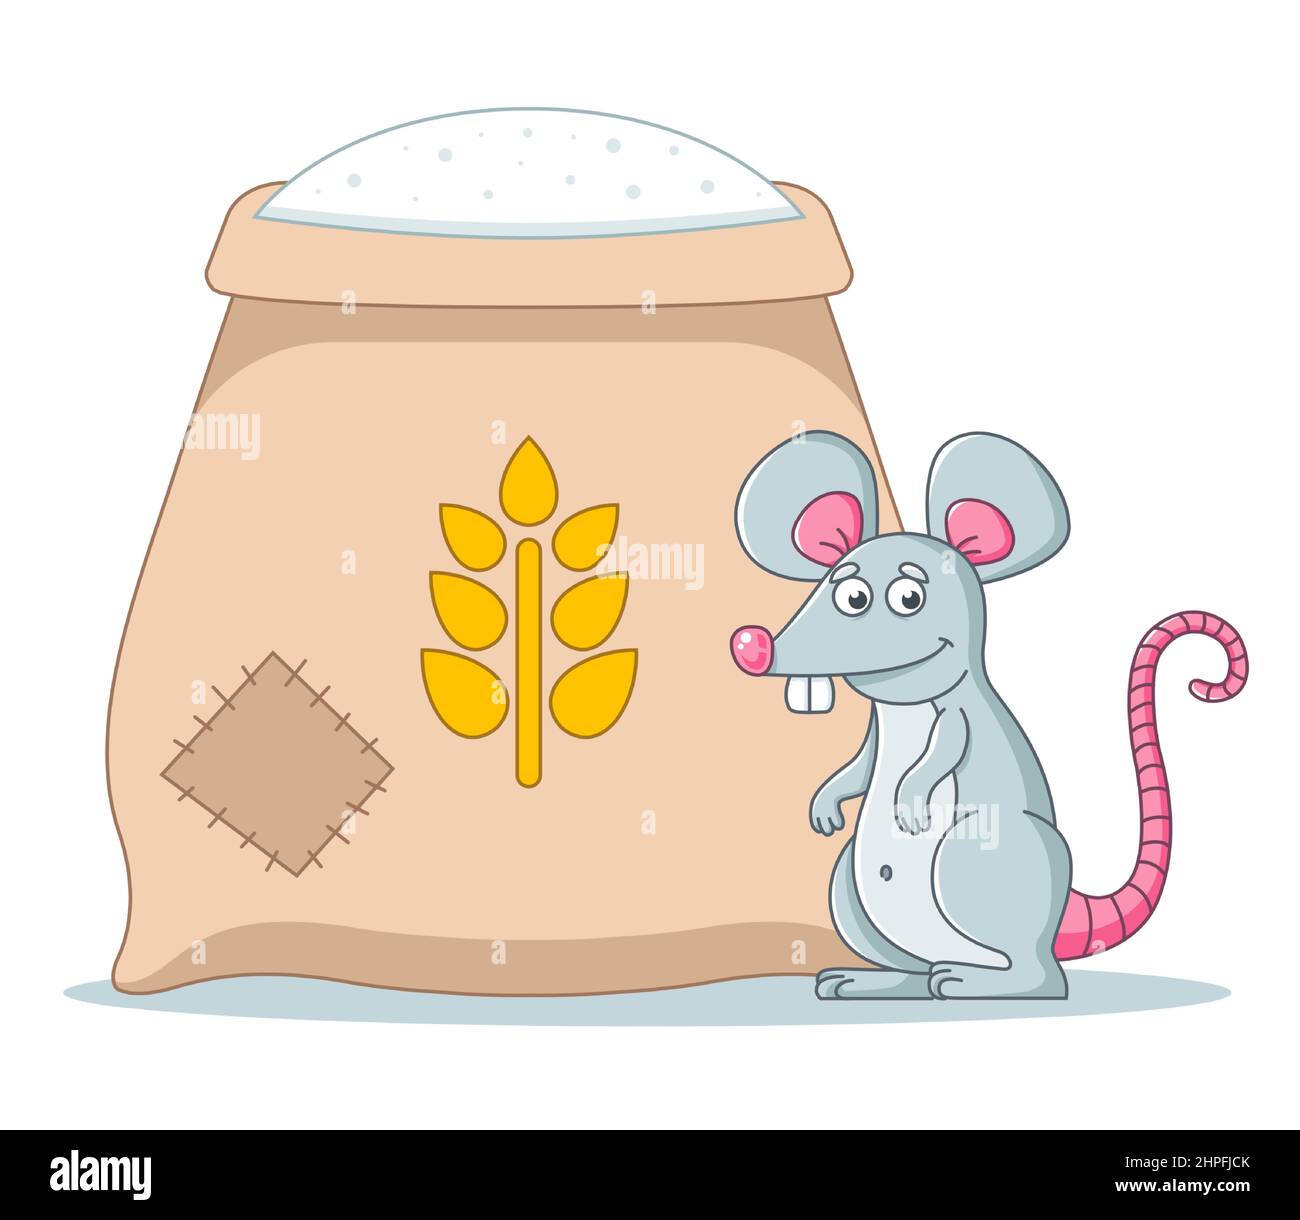 a large bag of flour in the barn. rodents spoil food. Stock Vector